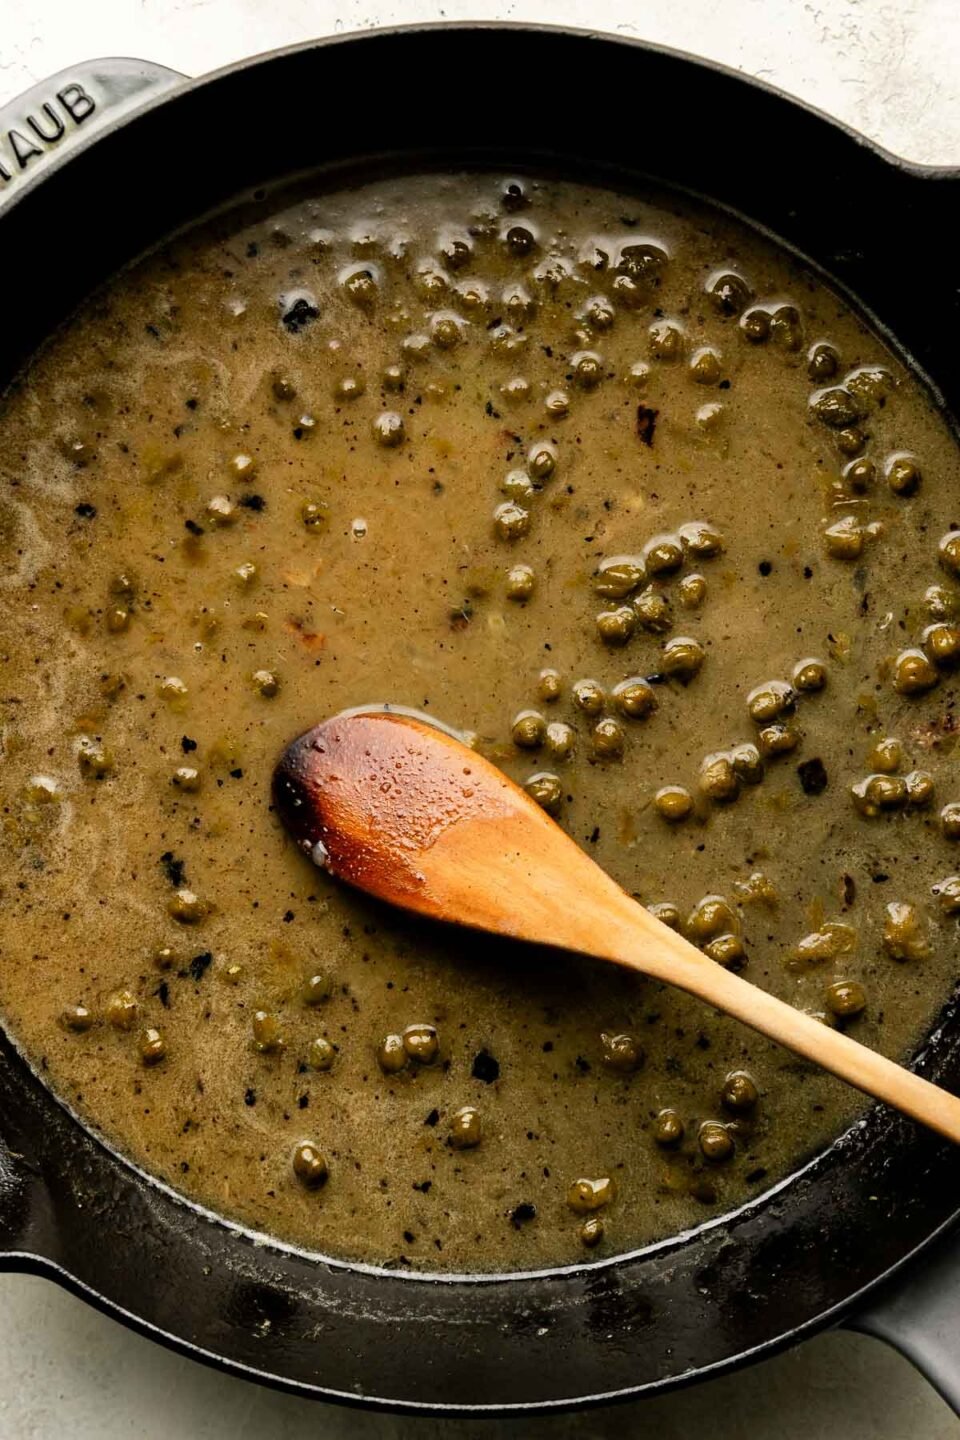 An overhead shot of piccata sauce with a wooden spoon in a black skillet atop a textured off-white surface.